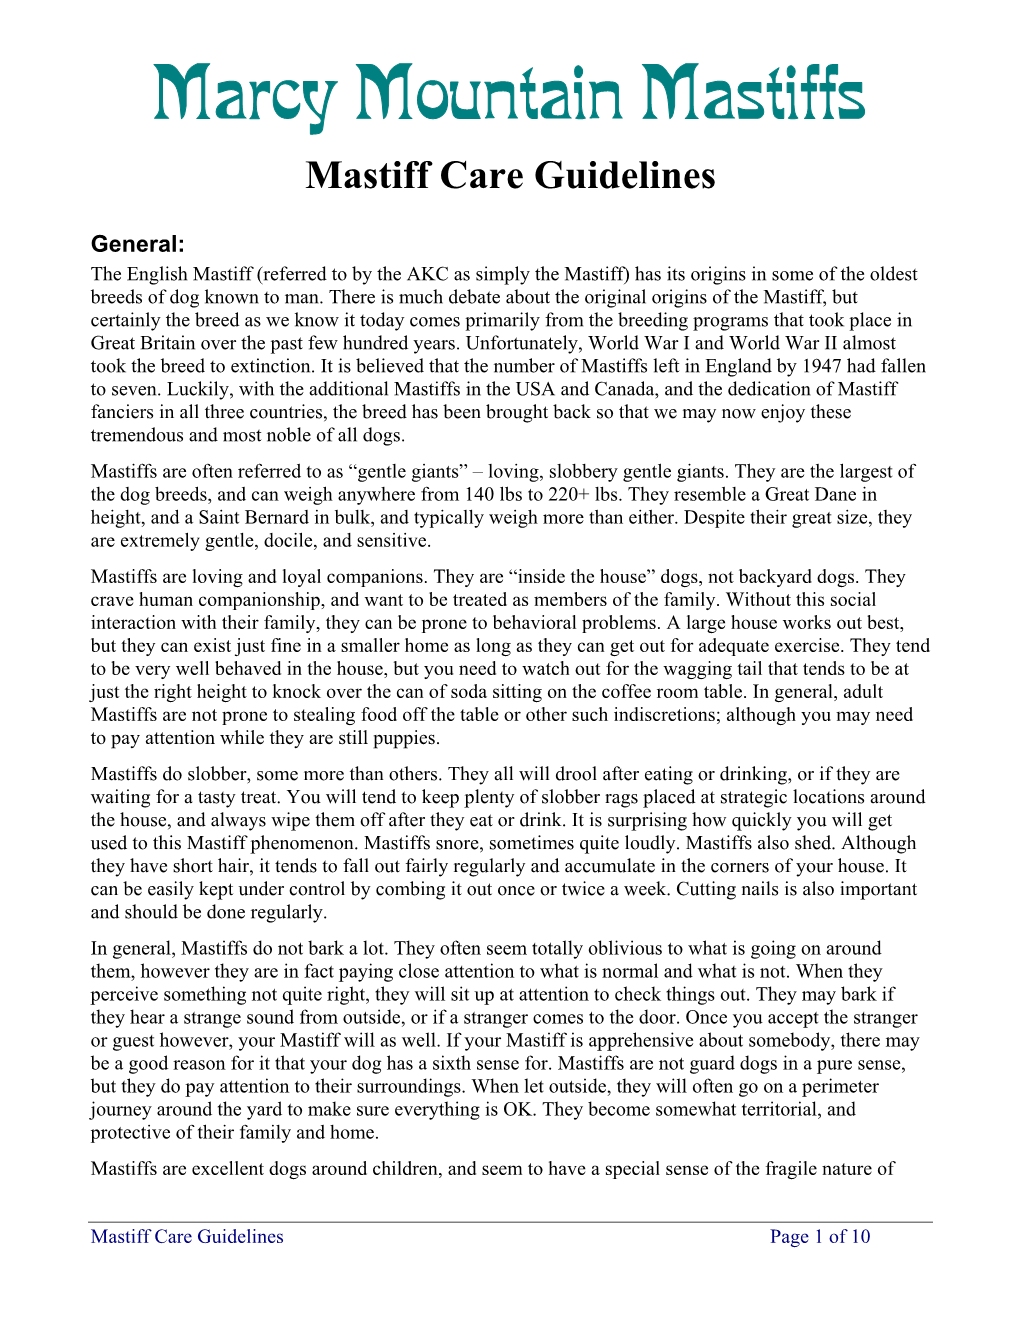 Marcy Mountain Mastiff Care Guidelines